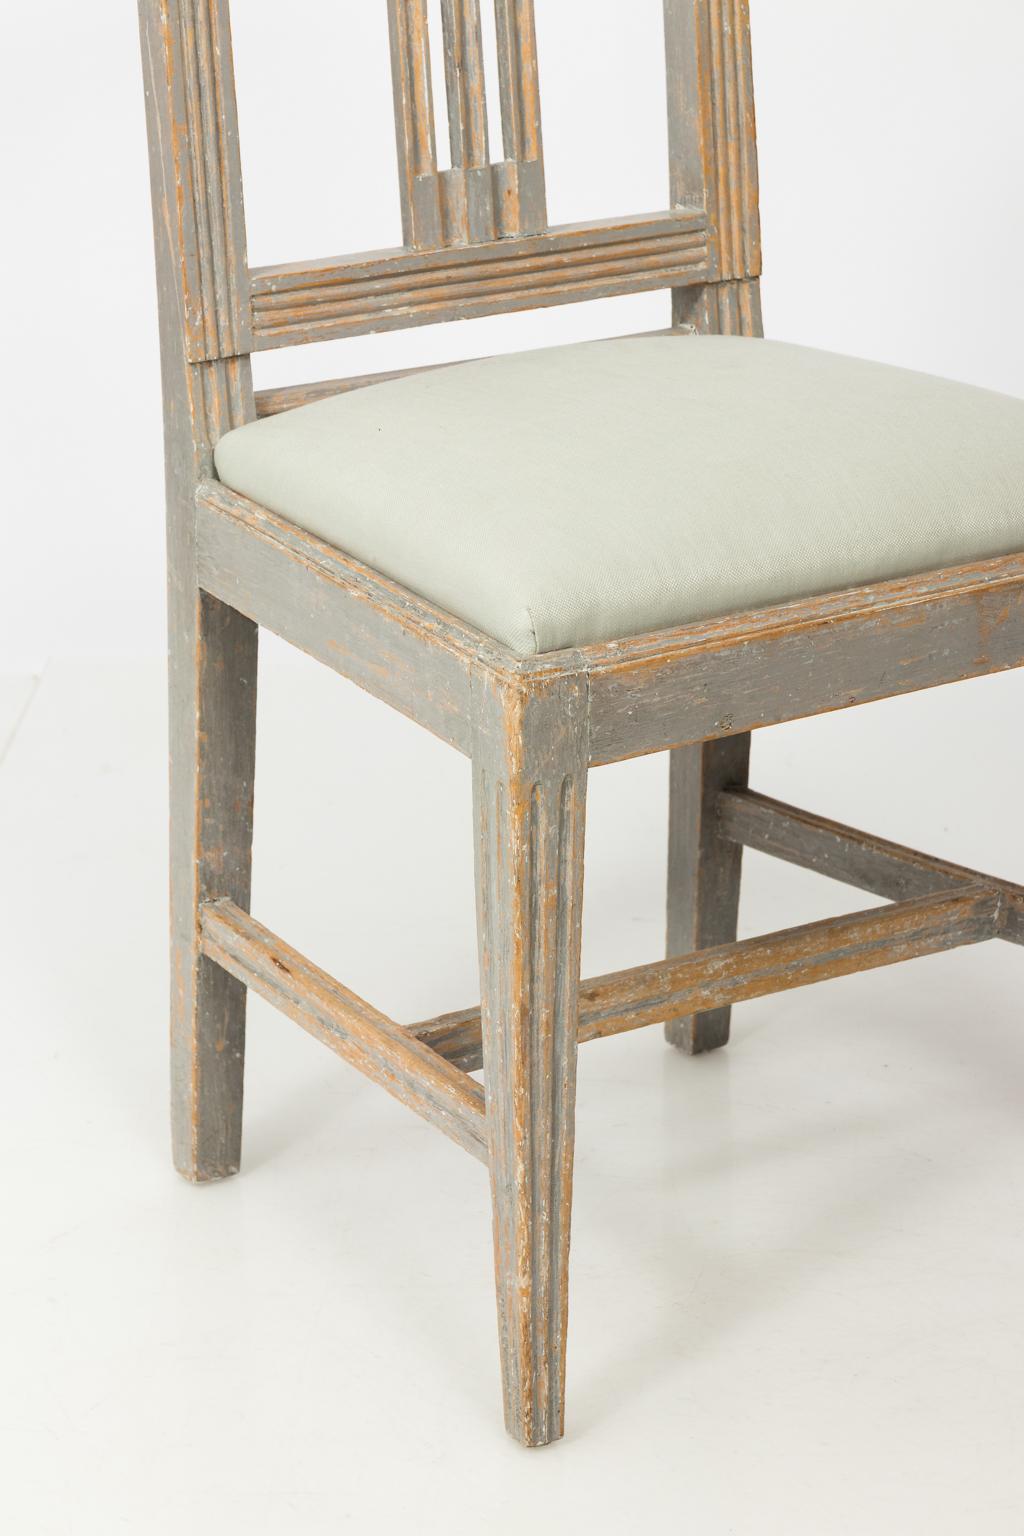 Antique Gustavian side chair with a painted frame, distress finish, and open square back design with center slats. Seat is upholstered in Victorian Hegan fabric, circa 1800s.
 